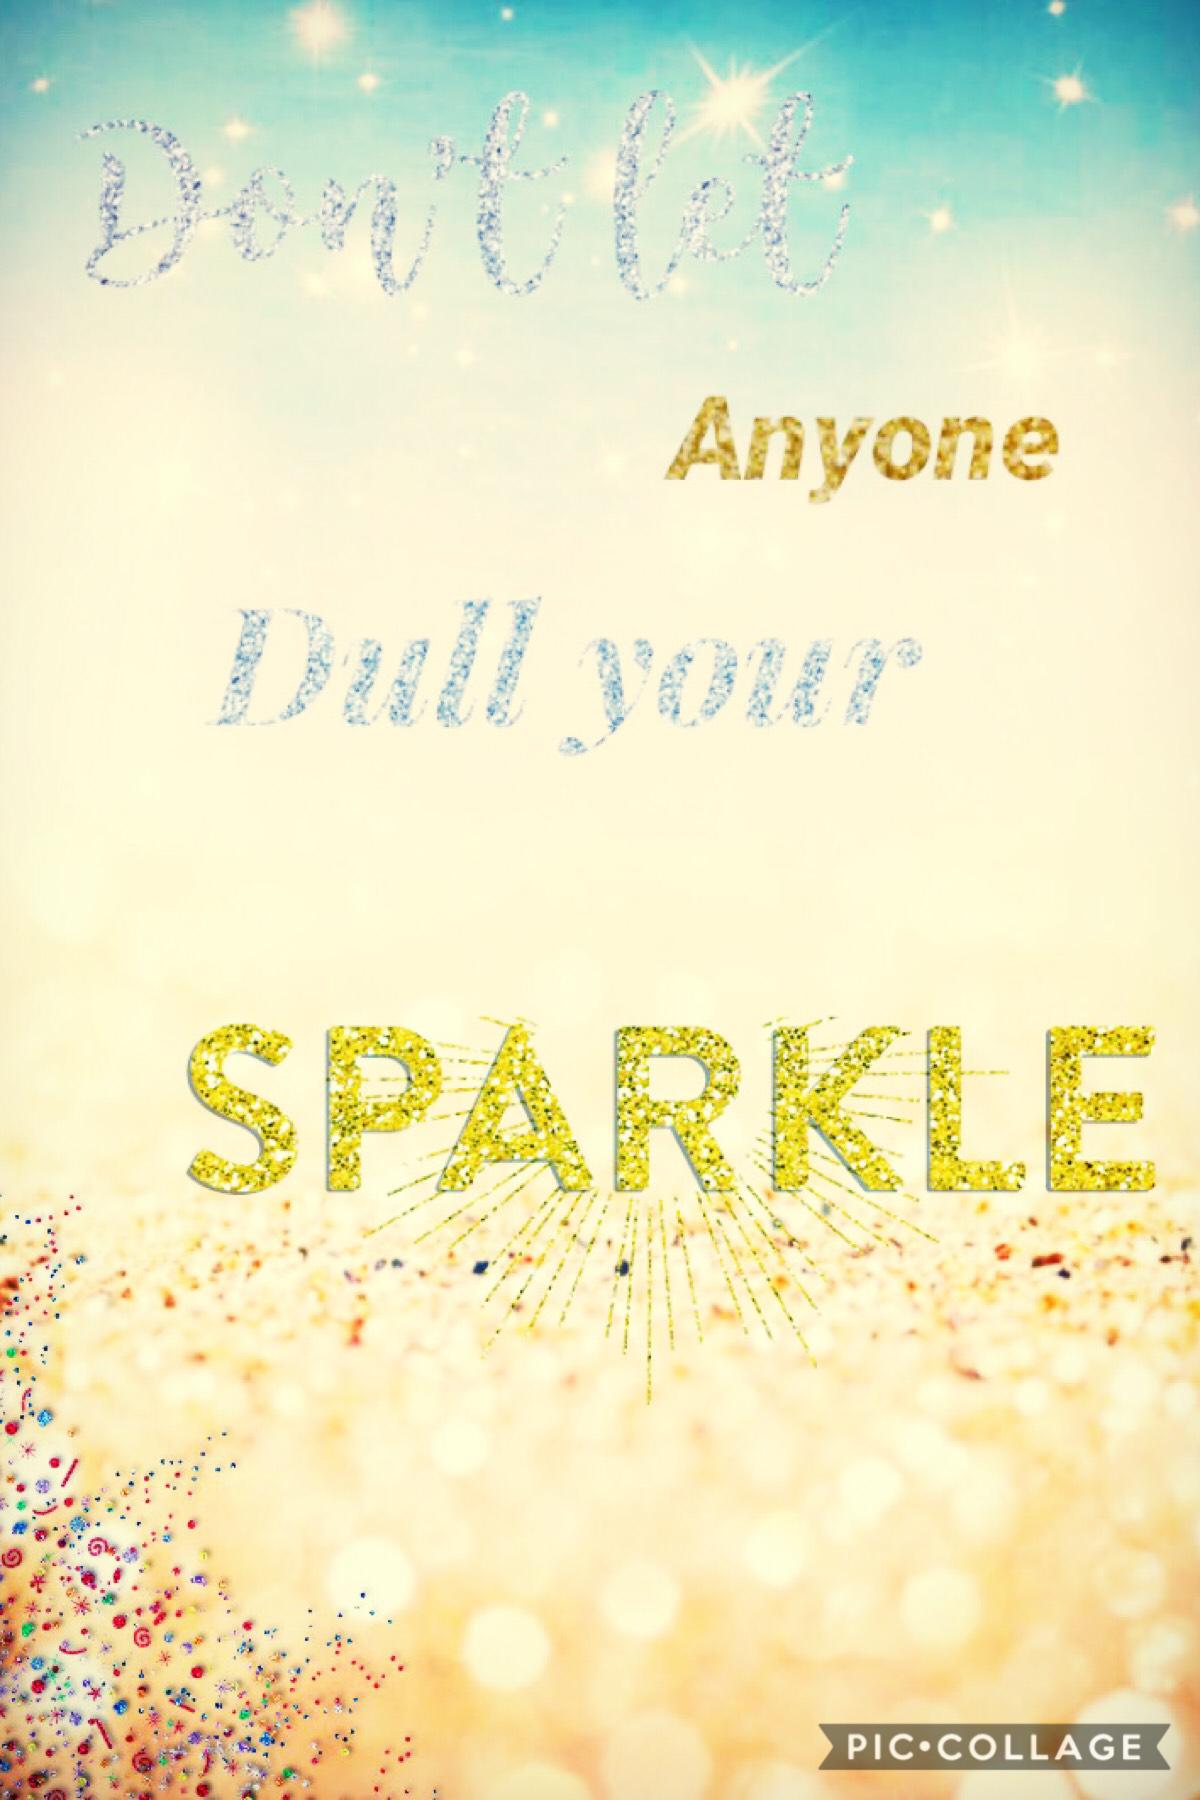 Don’t let anyone dull your sparkle💜